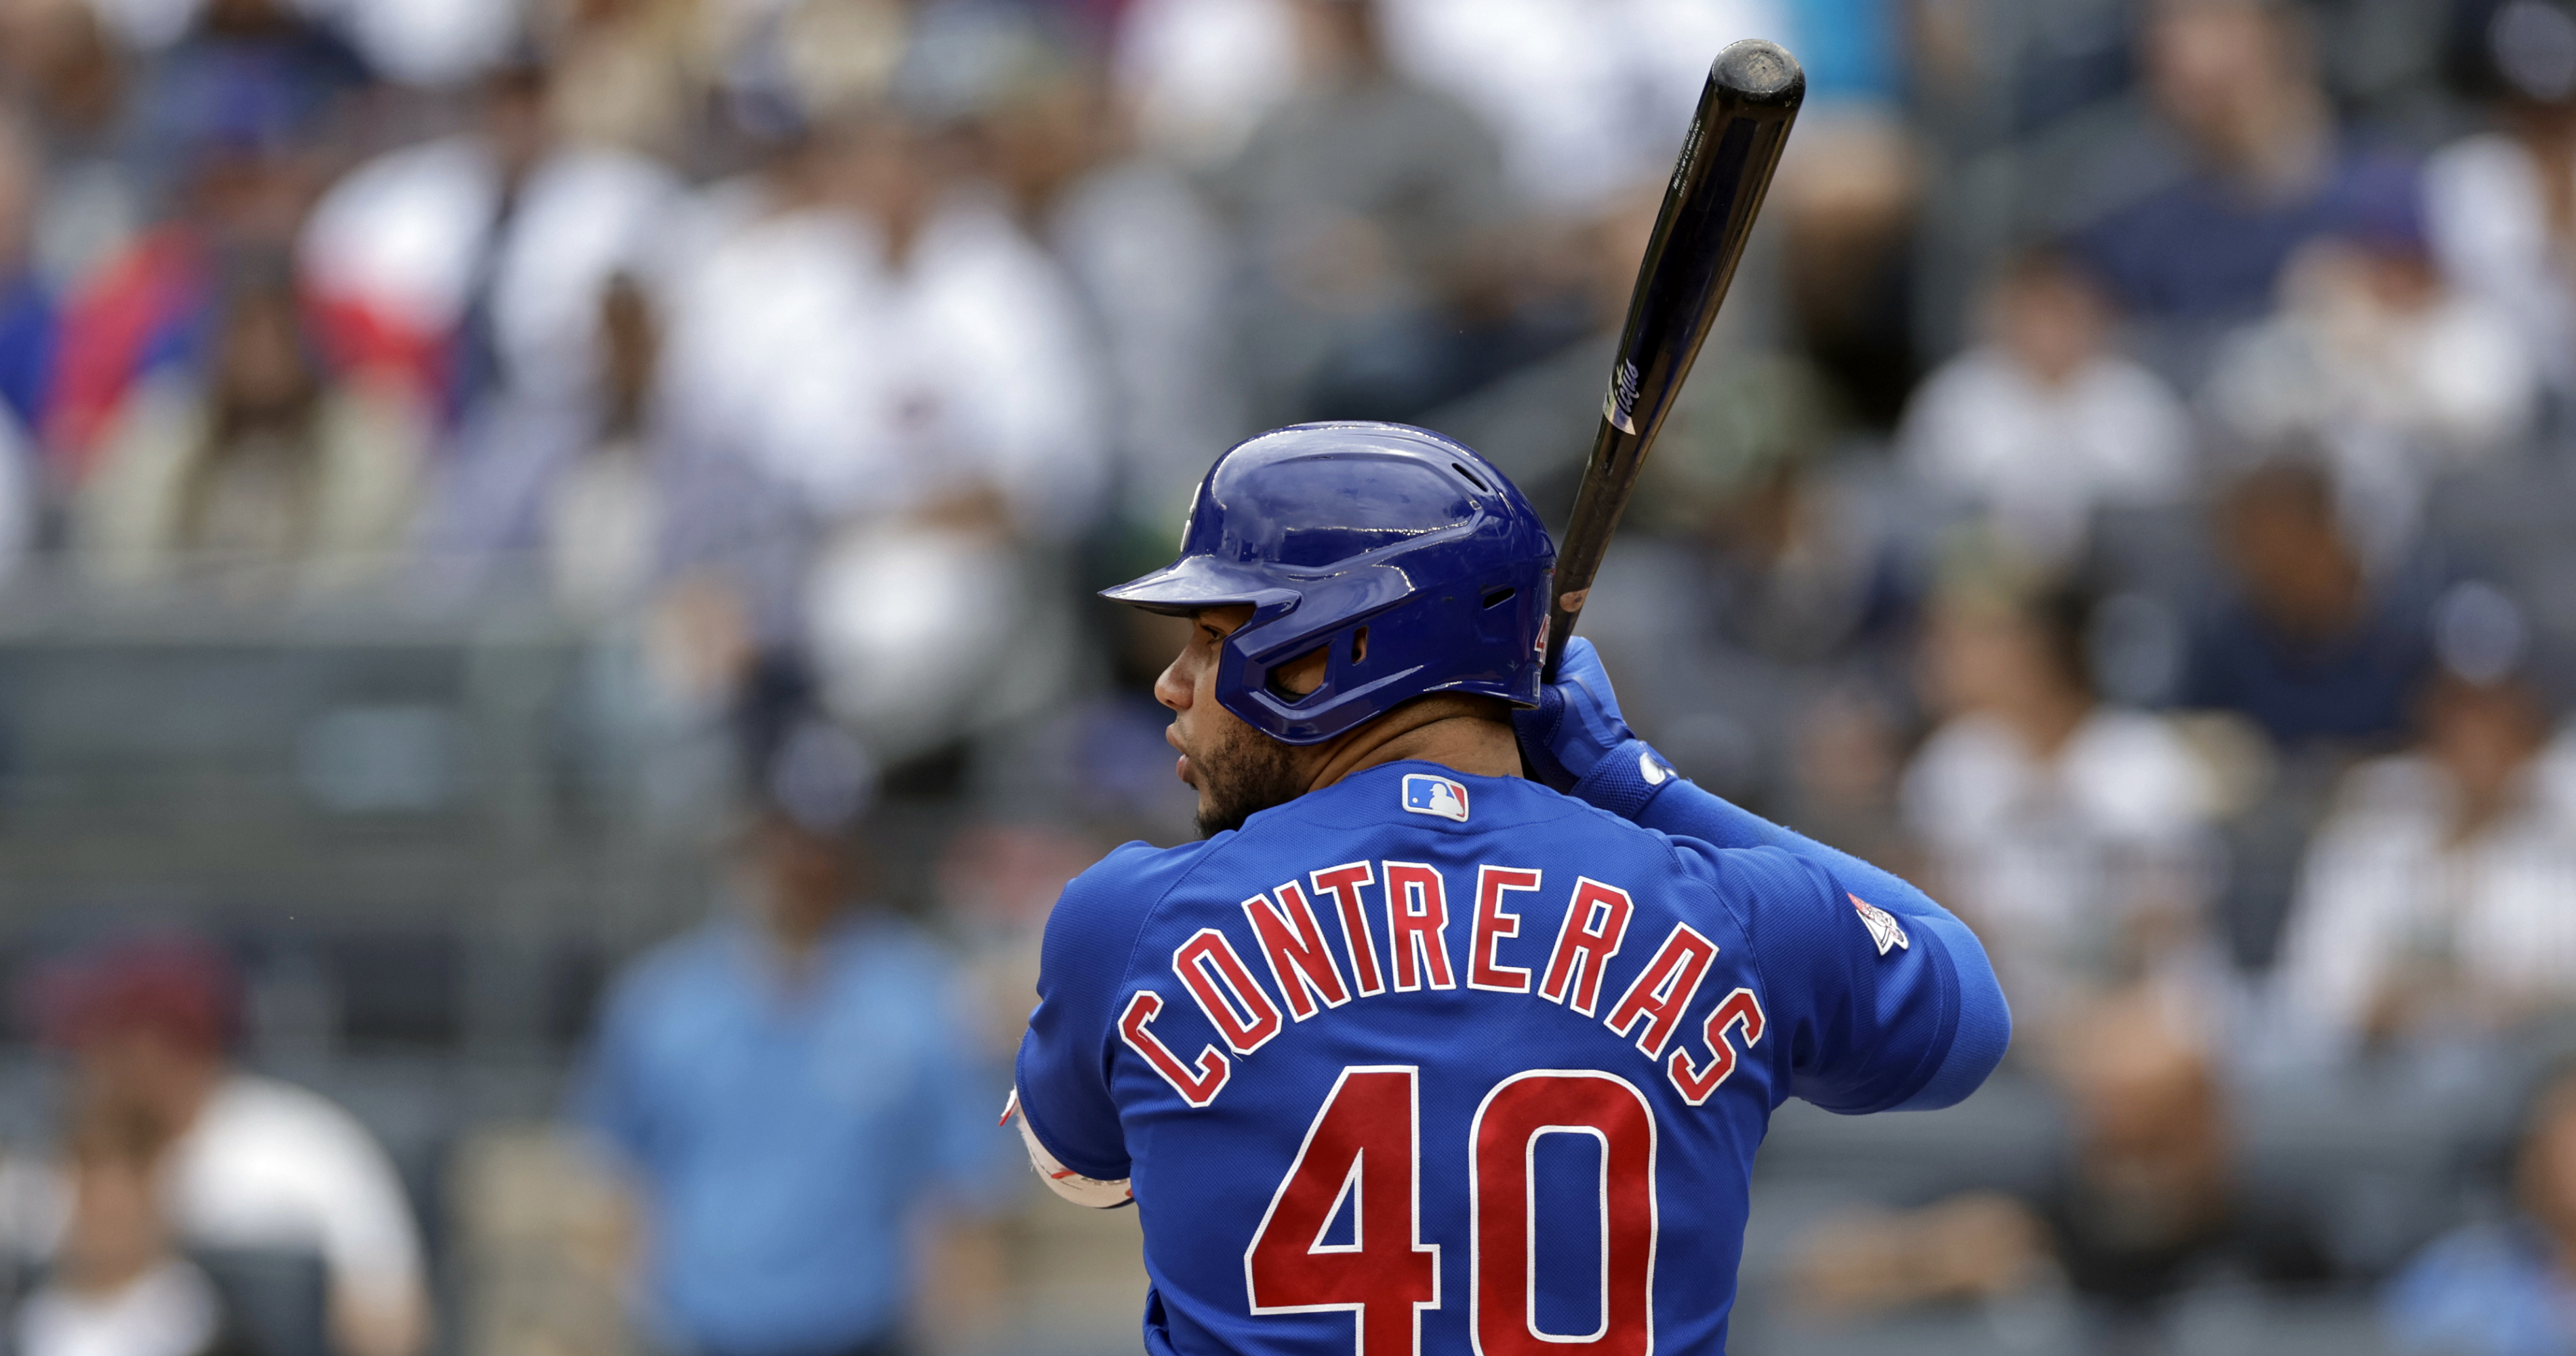 The Cardinals need to sign Willson Contreras this winter